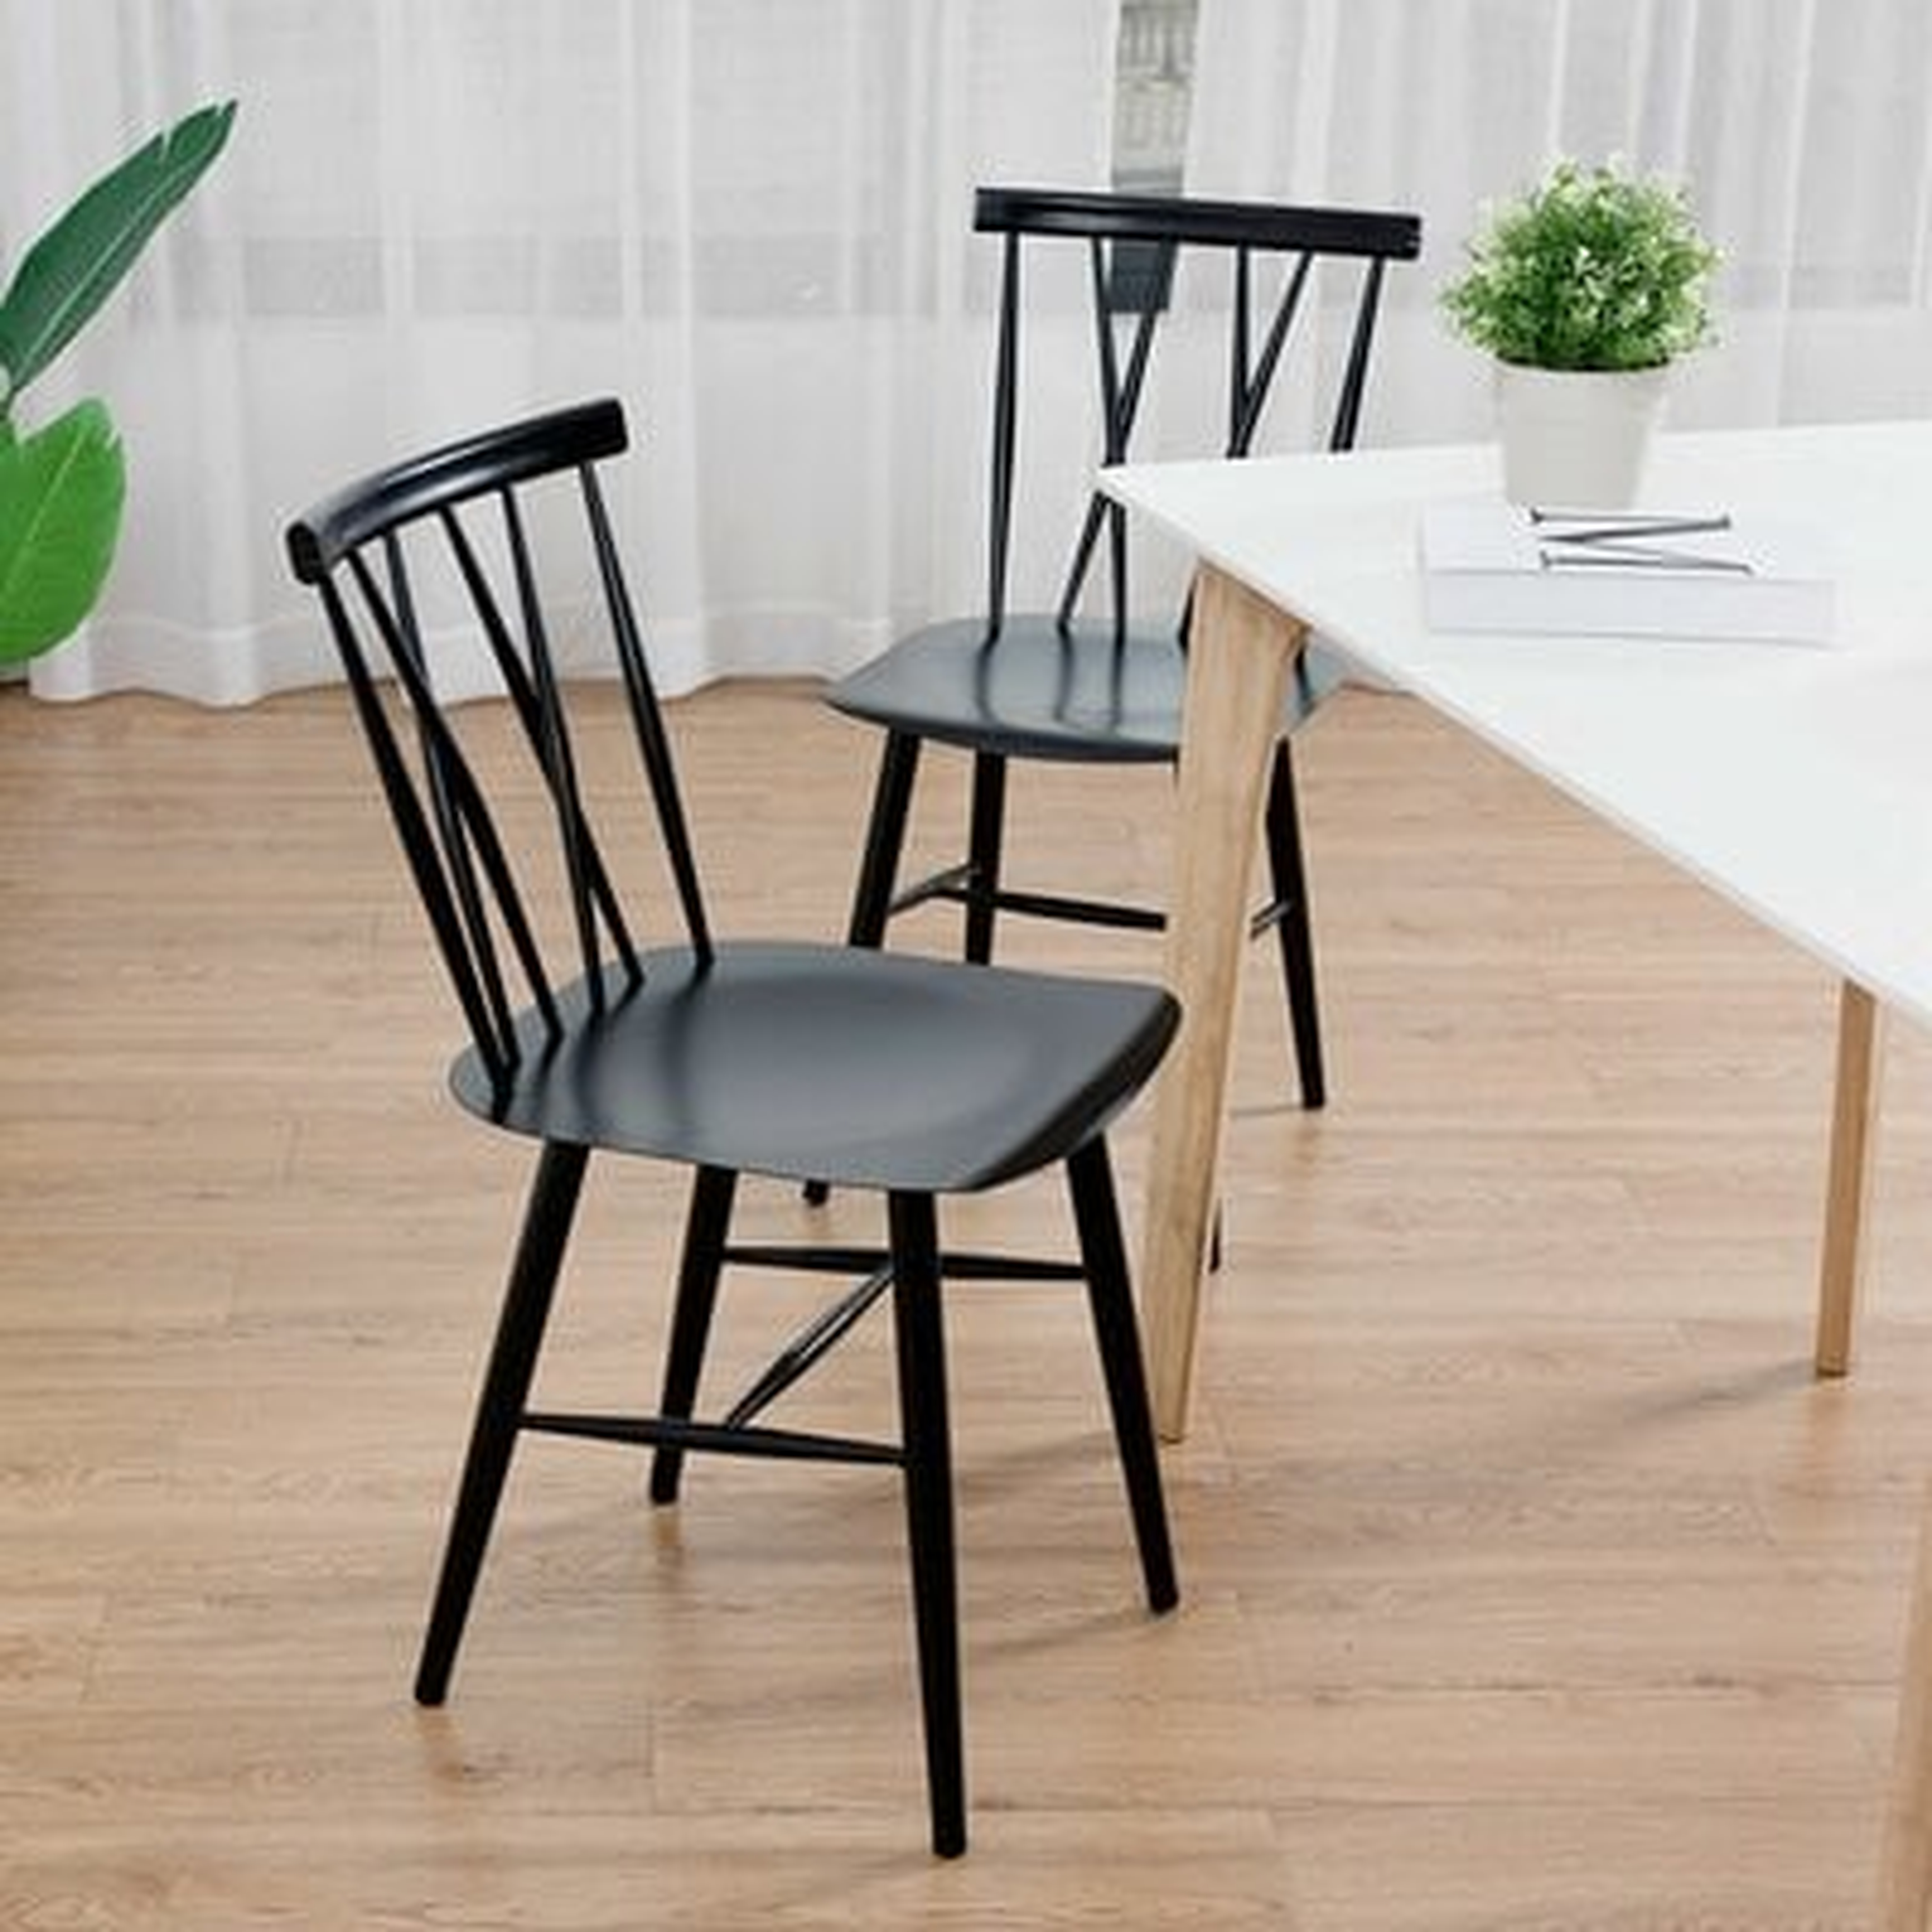 Encinal Set of 2 Dining Side Chairs Tolix Chairs Armless Cross Back Kitchen Bistro Cafe - Wayfair